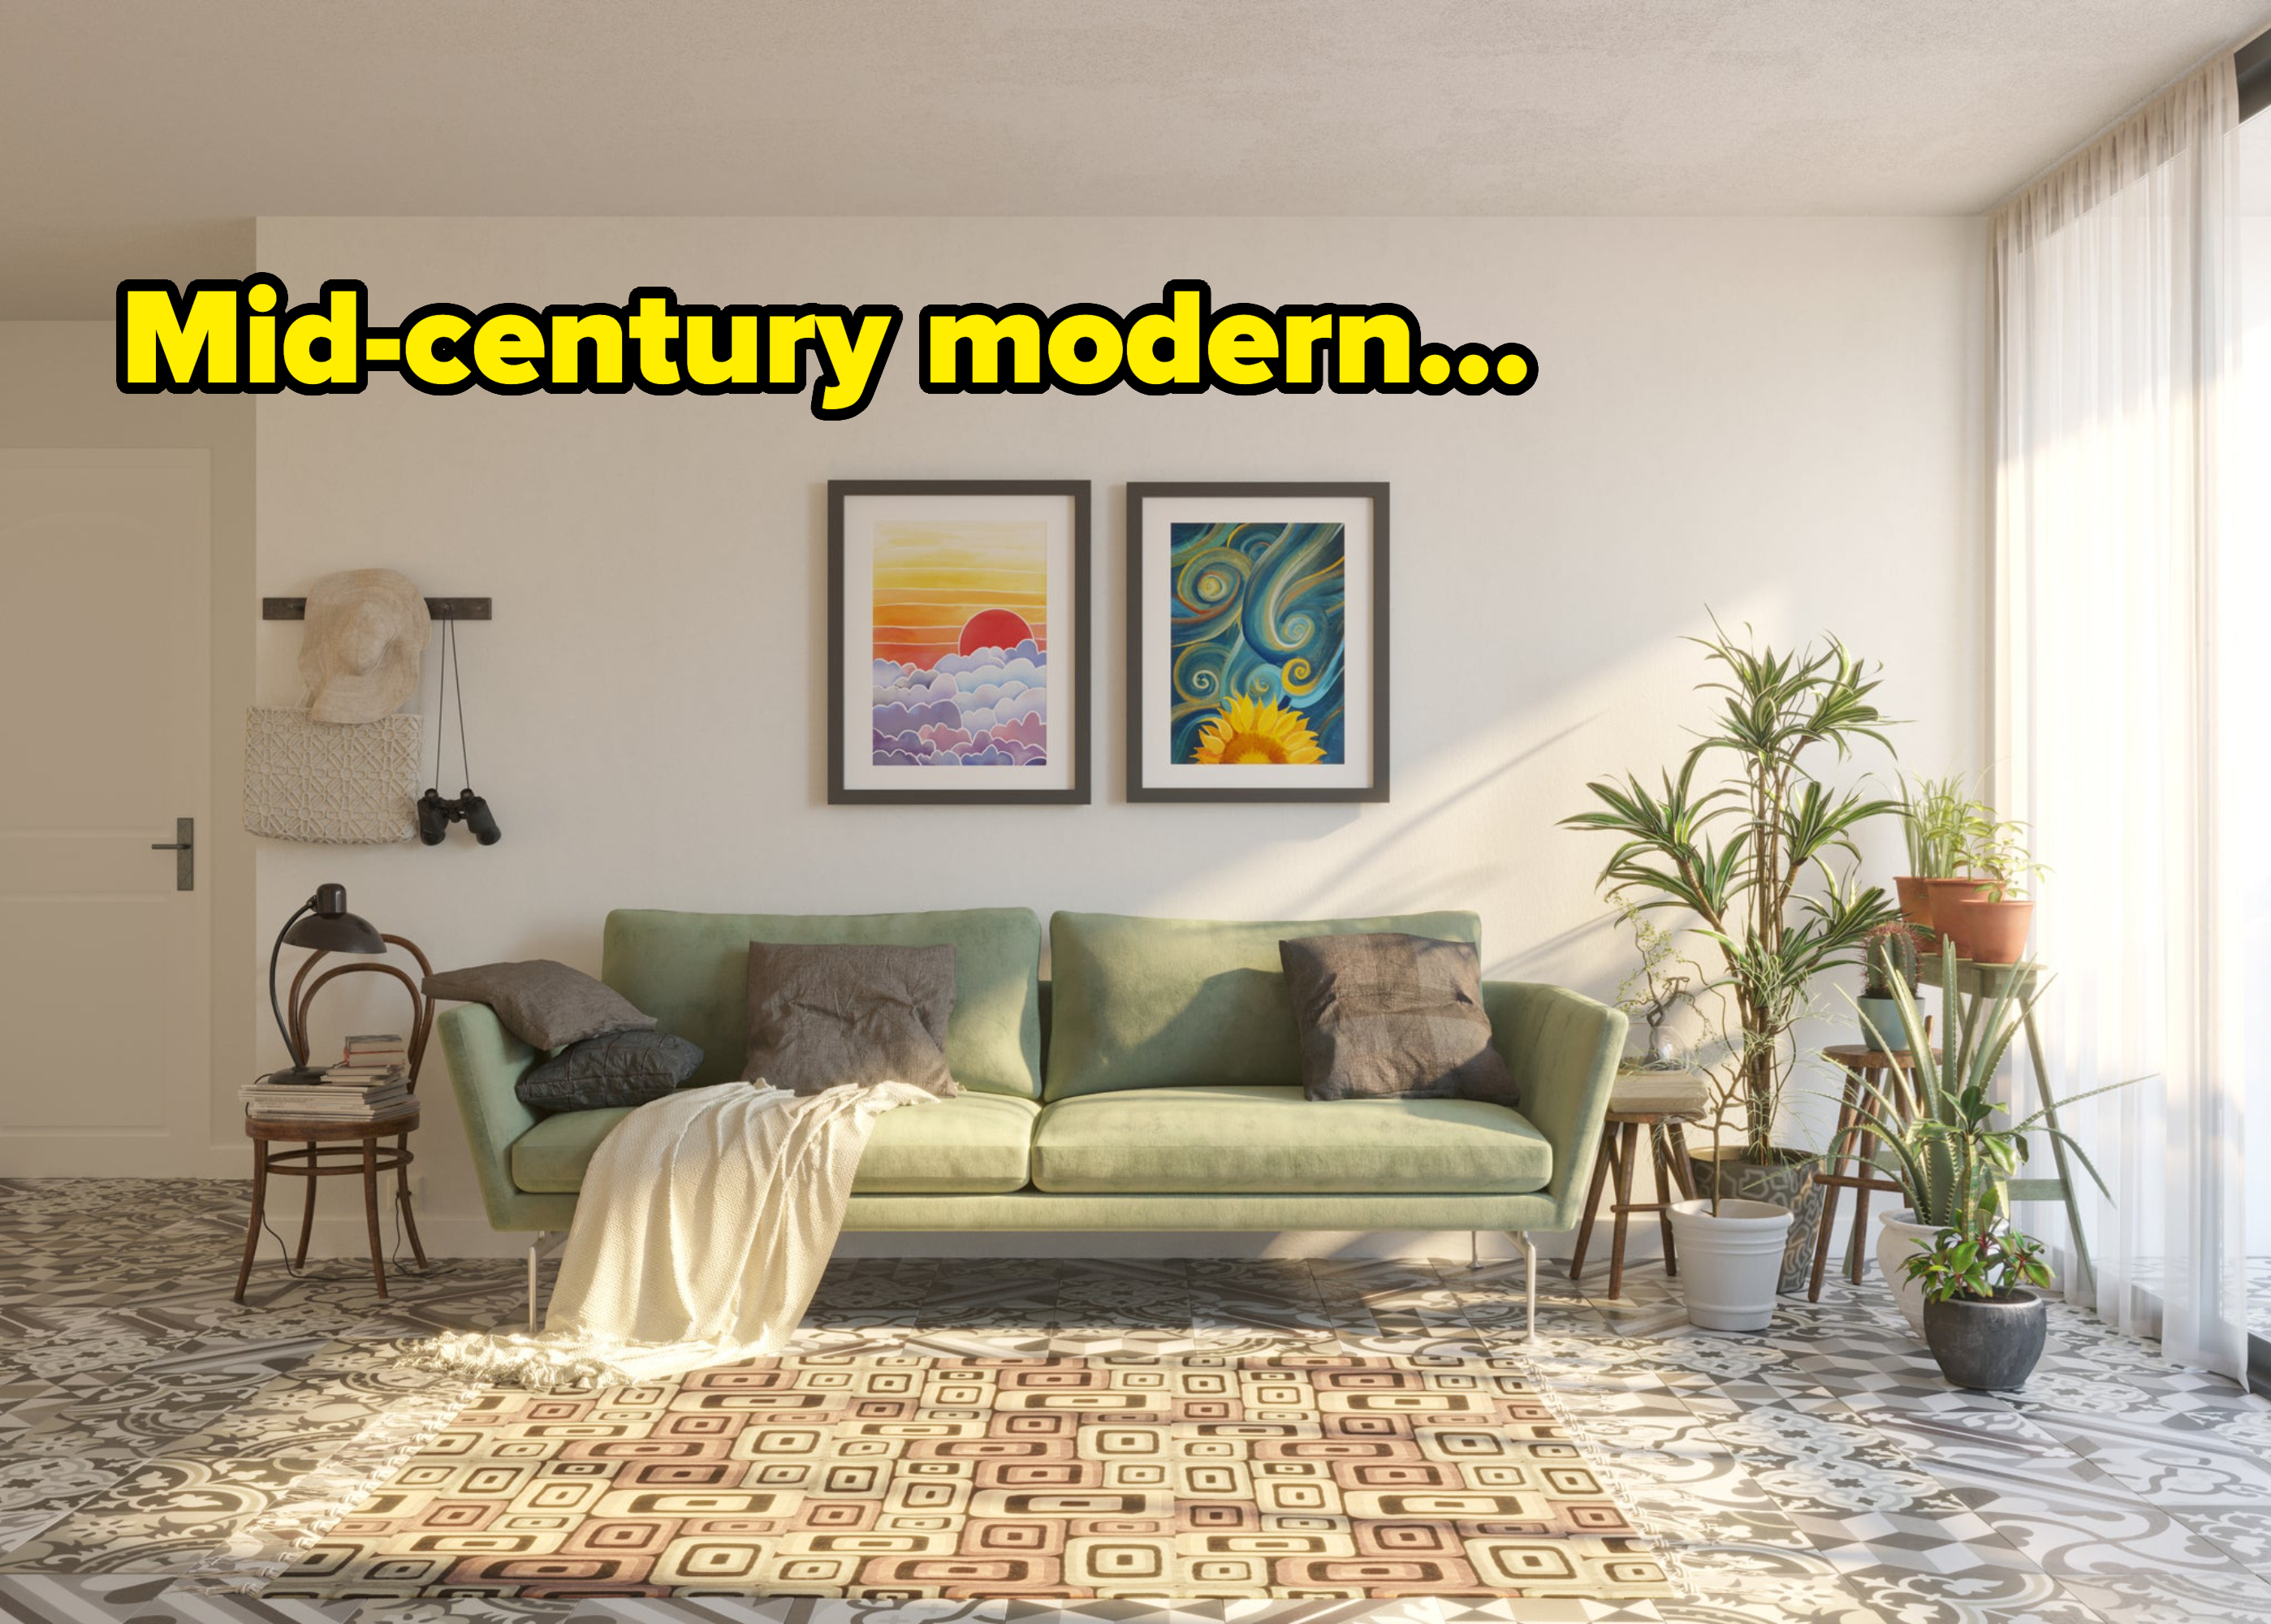 An example of mid-century modern, with a very clean, minimally styled living room showing a plain couch, throw rug, plants, and several small framed paintings